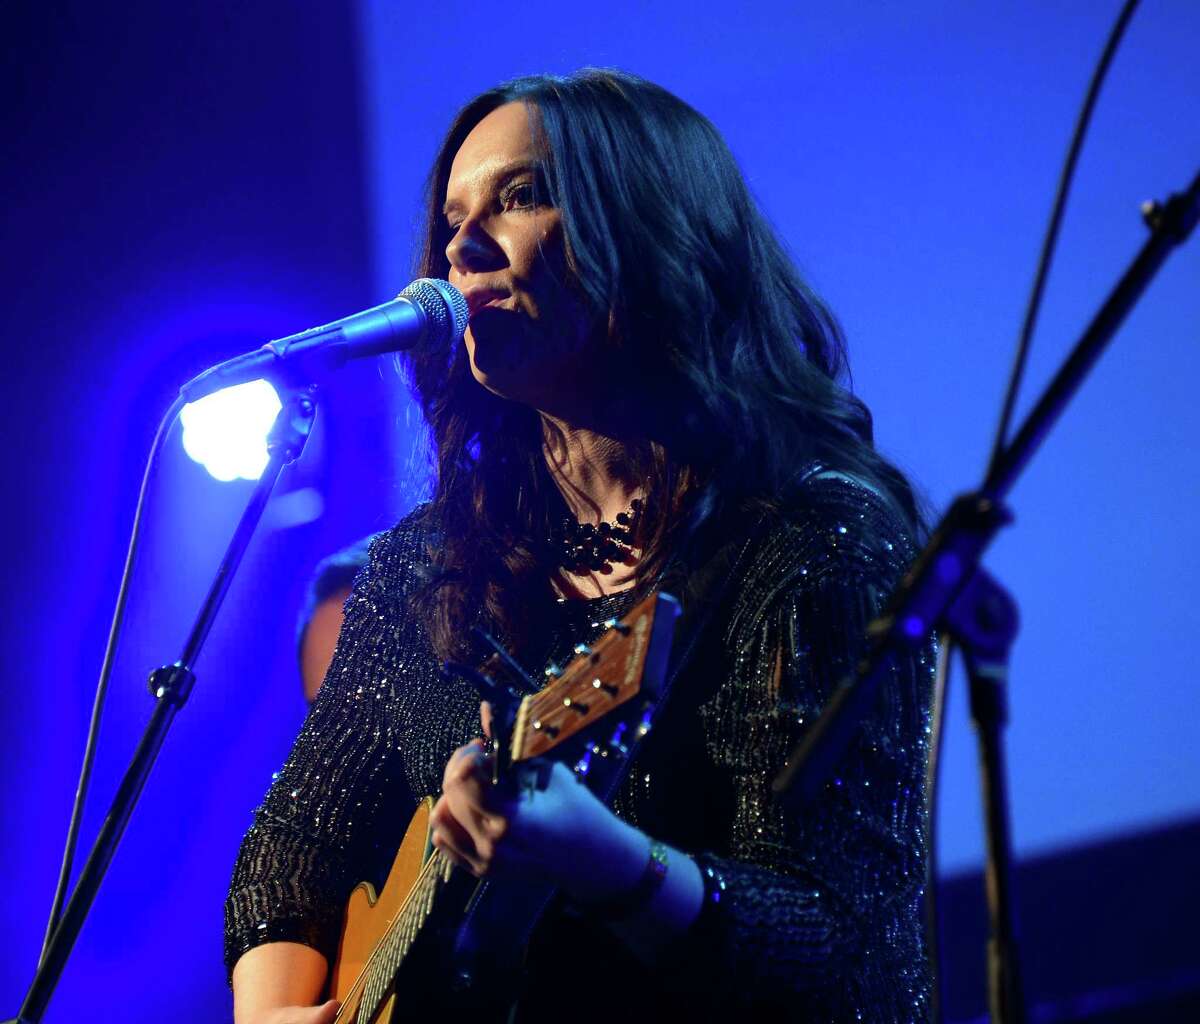 Brandy Clark opens for and performs with Nettles.